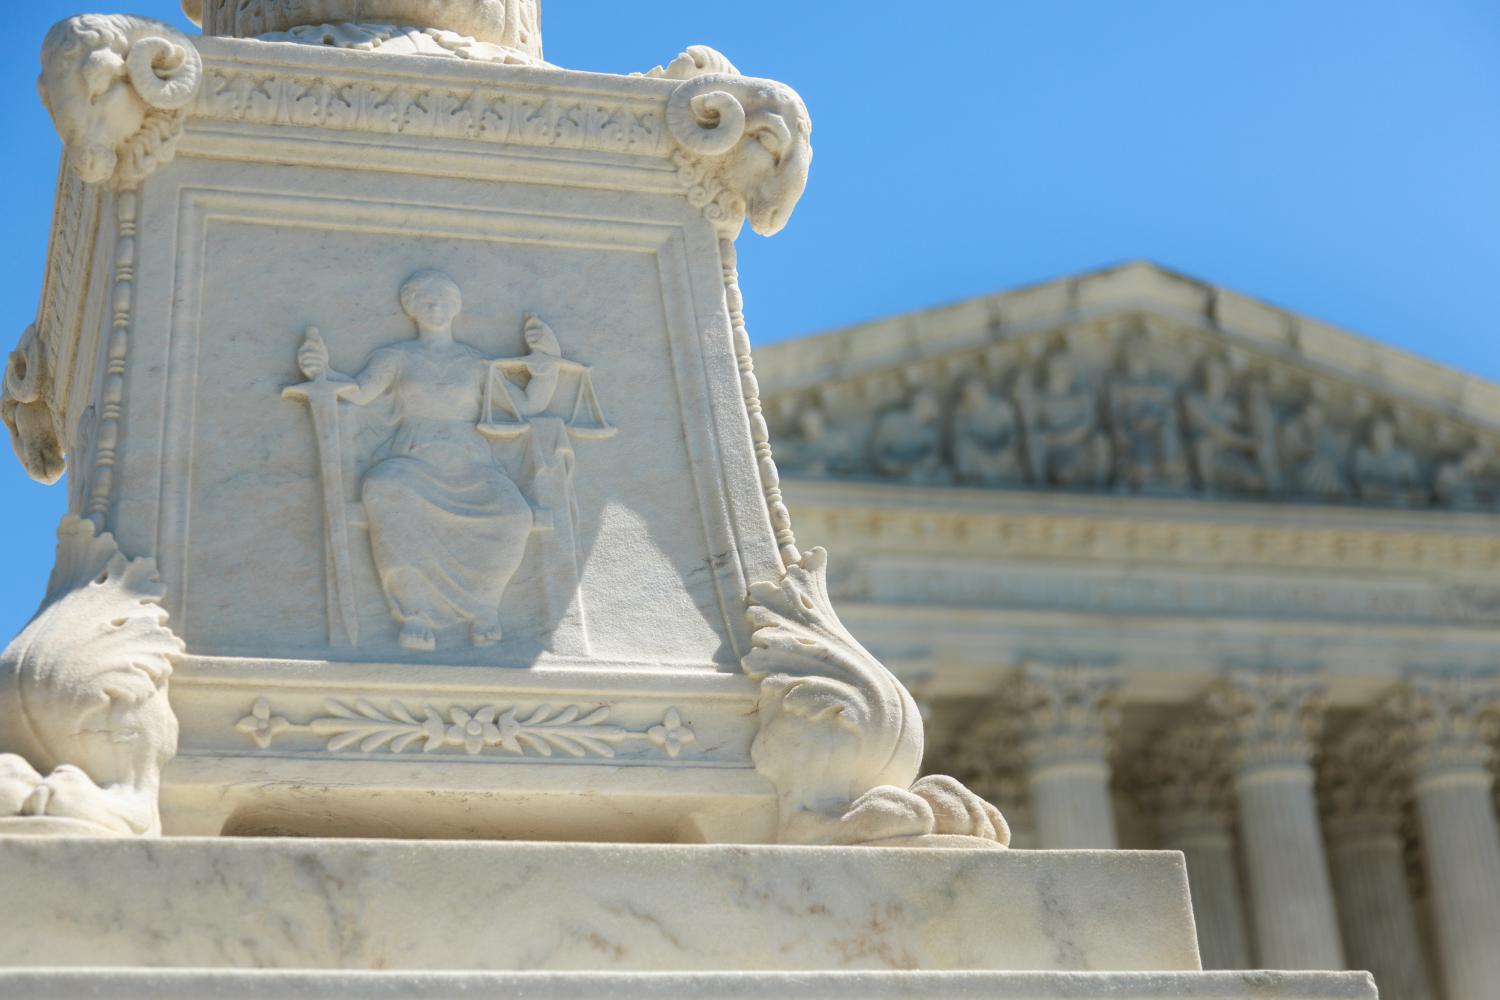 The Supreme Court buildling in Washington, D.C. is seen on April 13, 2023, as it is announced that the Department of Justice will ask the court to restore access to the abortion drug mifepristone. (Photo by Bryan Olin Dozier/NurPhoto)NO USE FRANCE